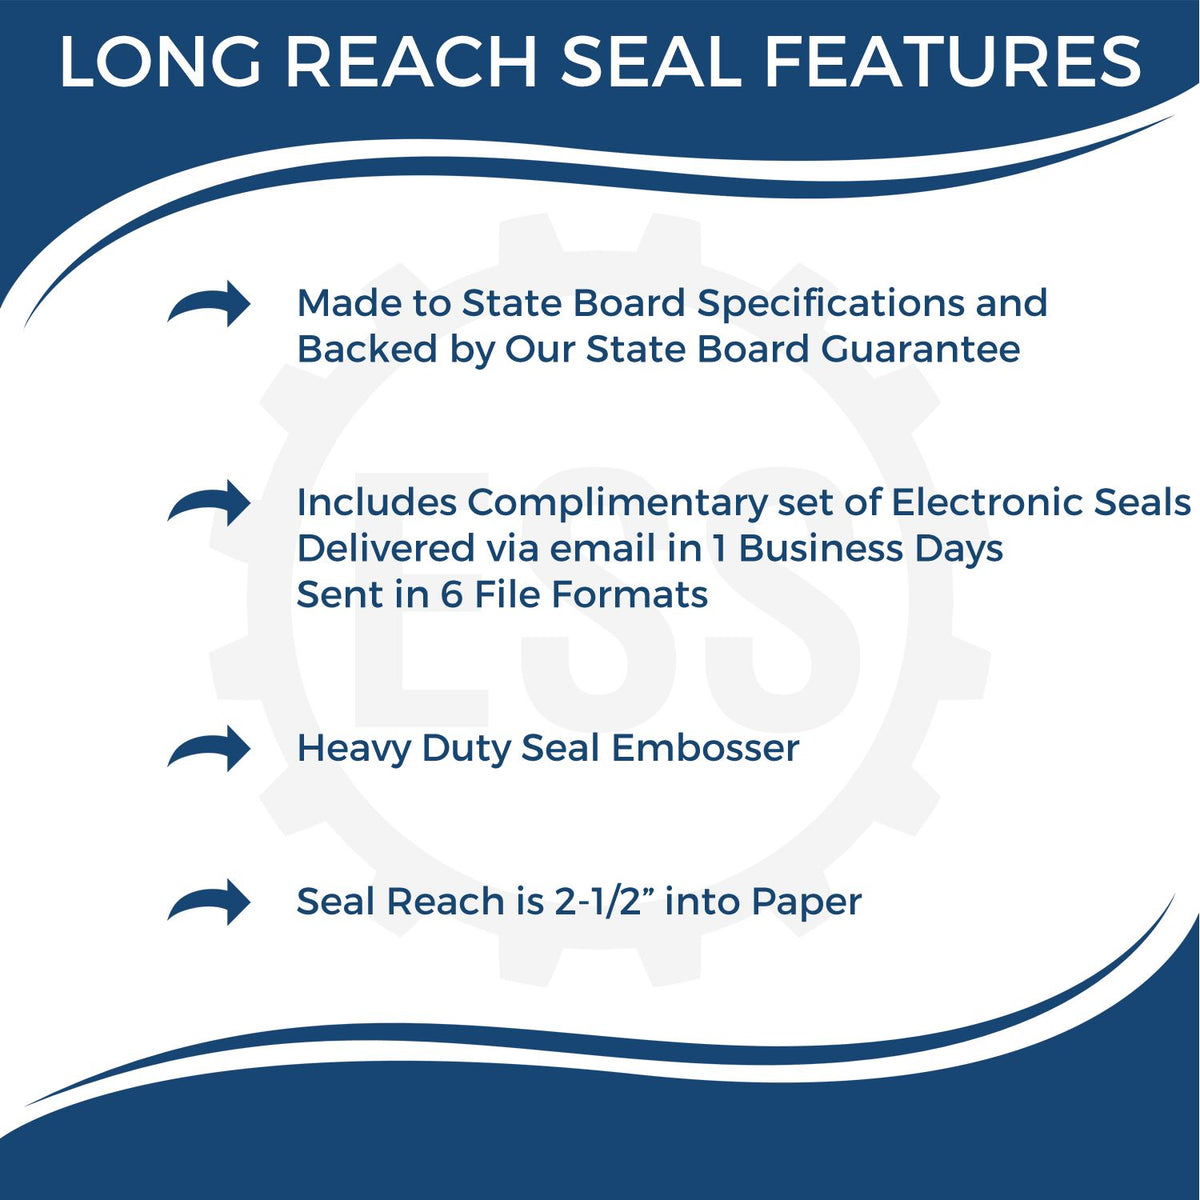 A picture of an infographic highlighting the selling points for the Long Reach Ohio PE Seal